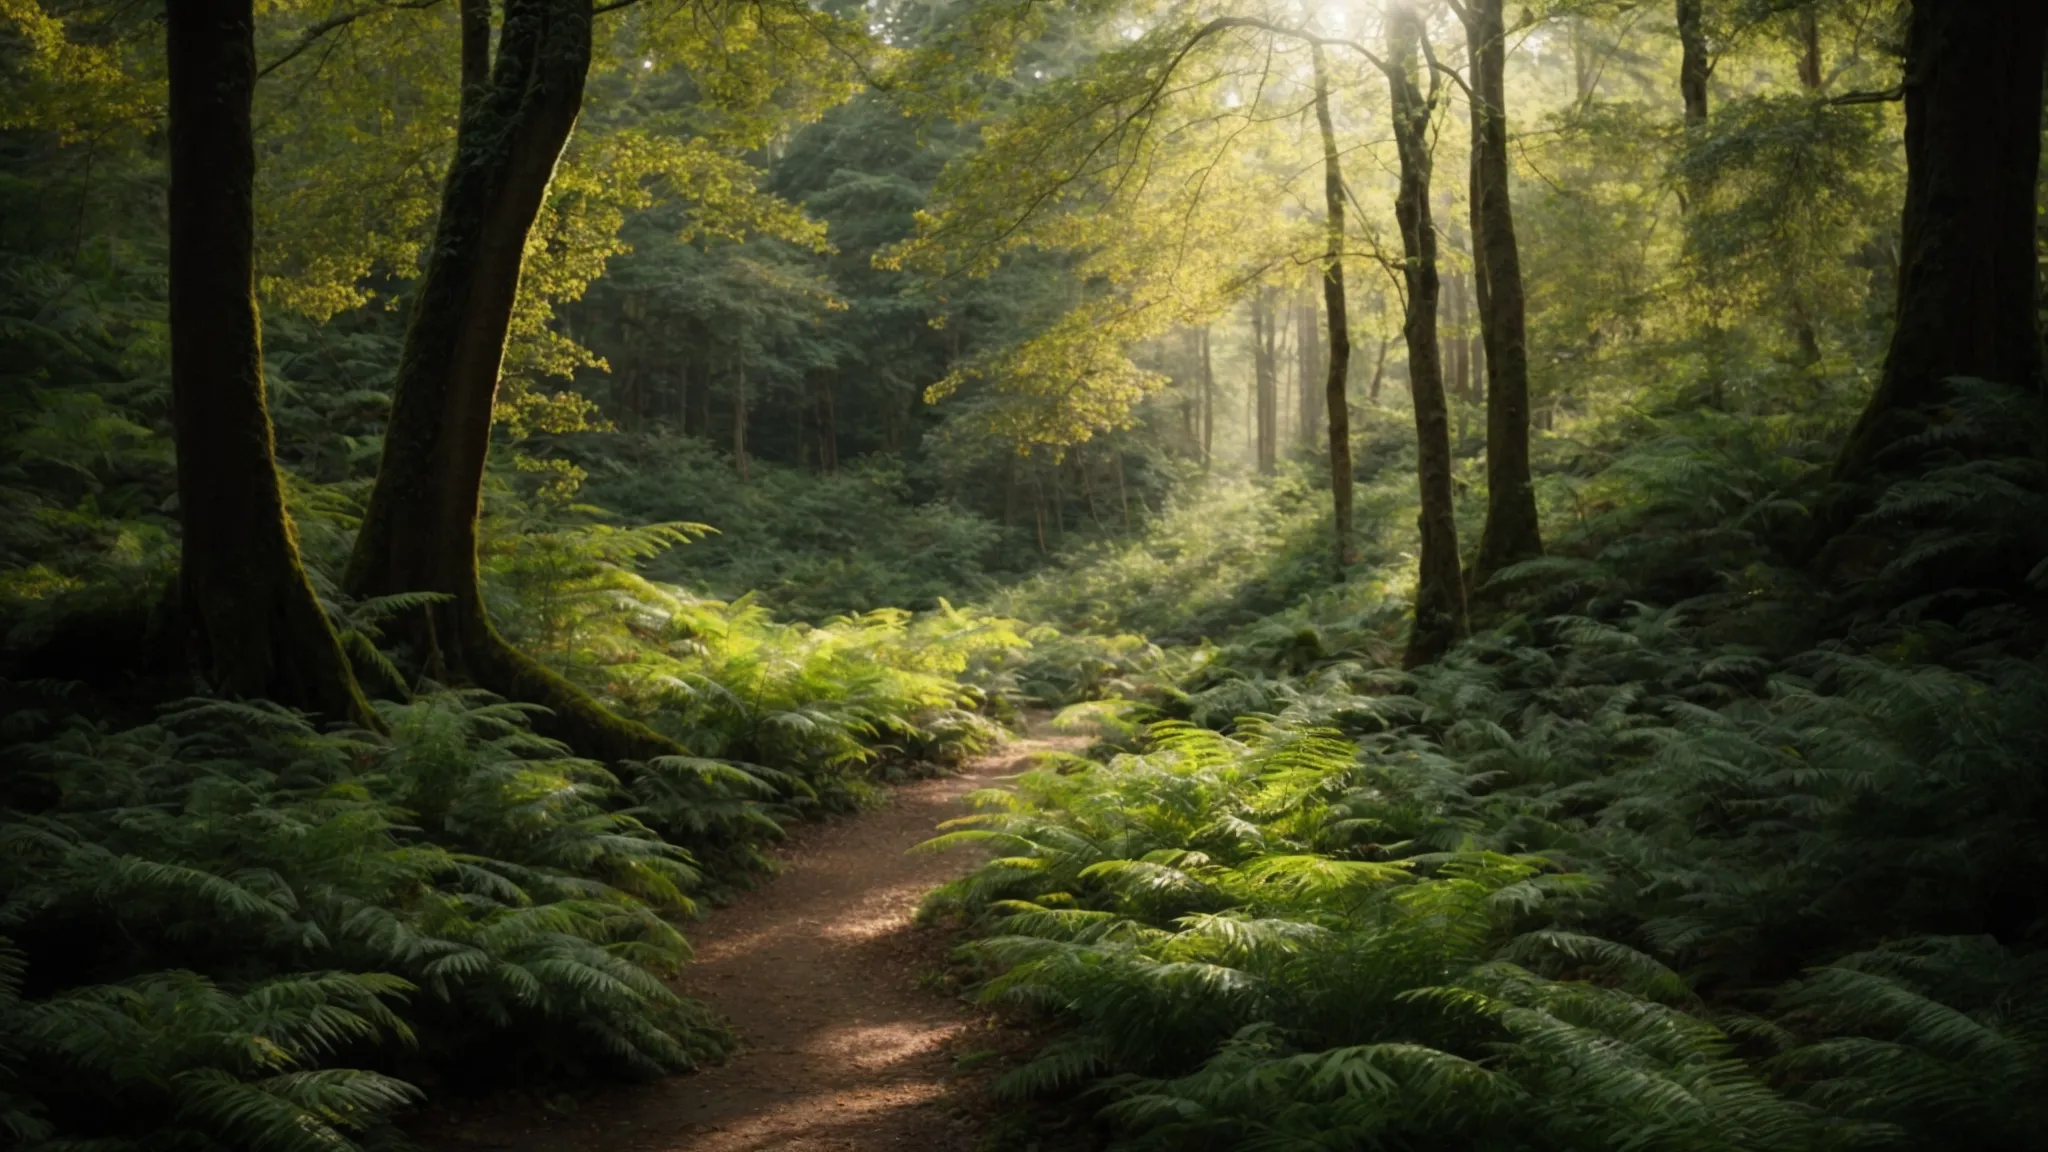 a dense forest with intertwining paths leading to a secluded glade bathed in sunlight.